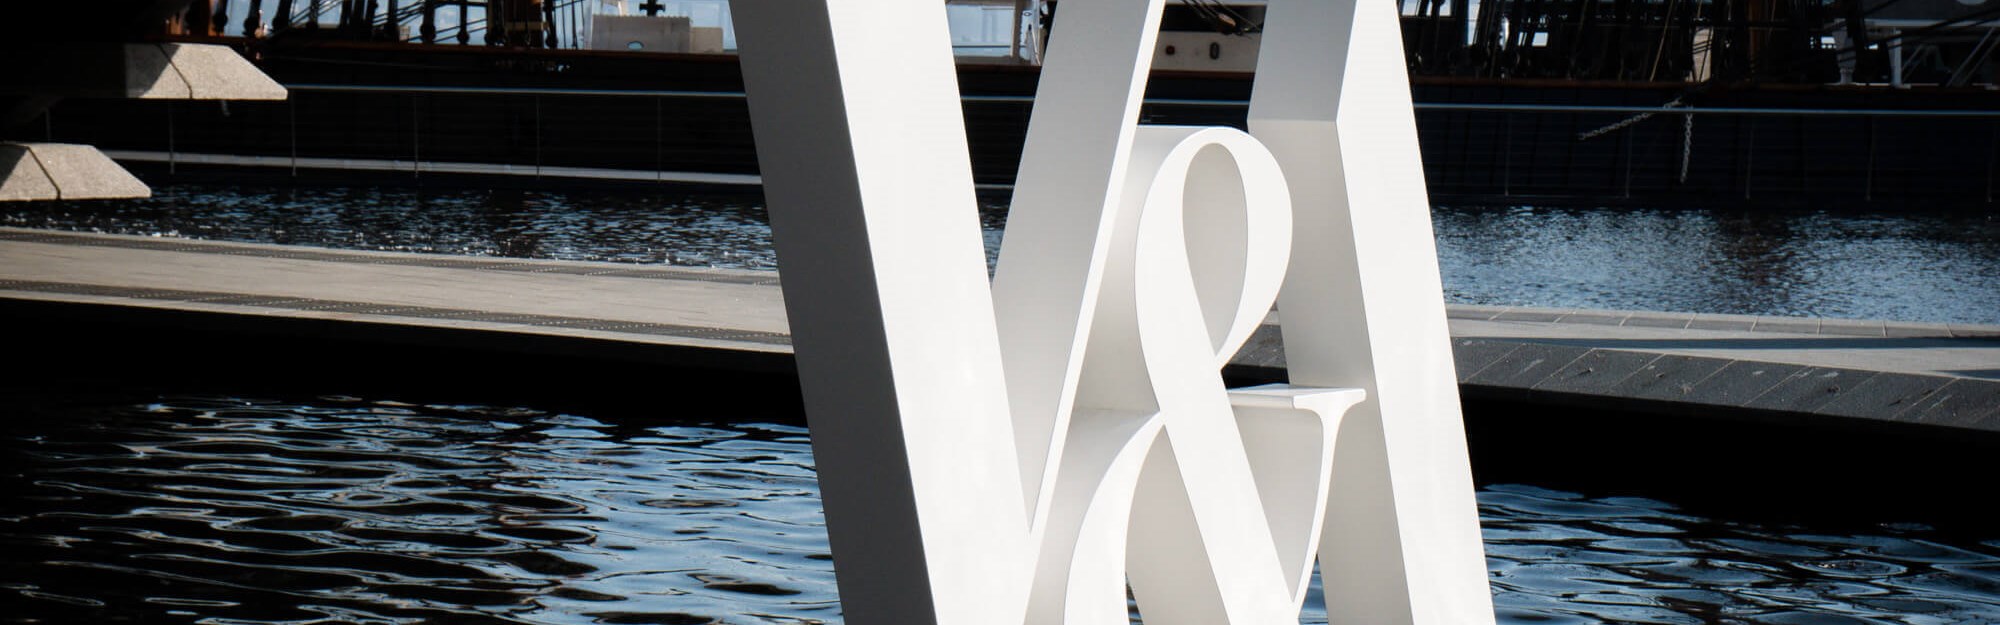 V&A Dundee sign in water